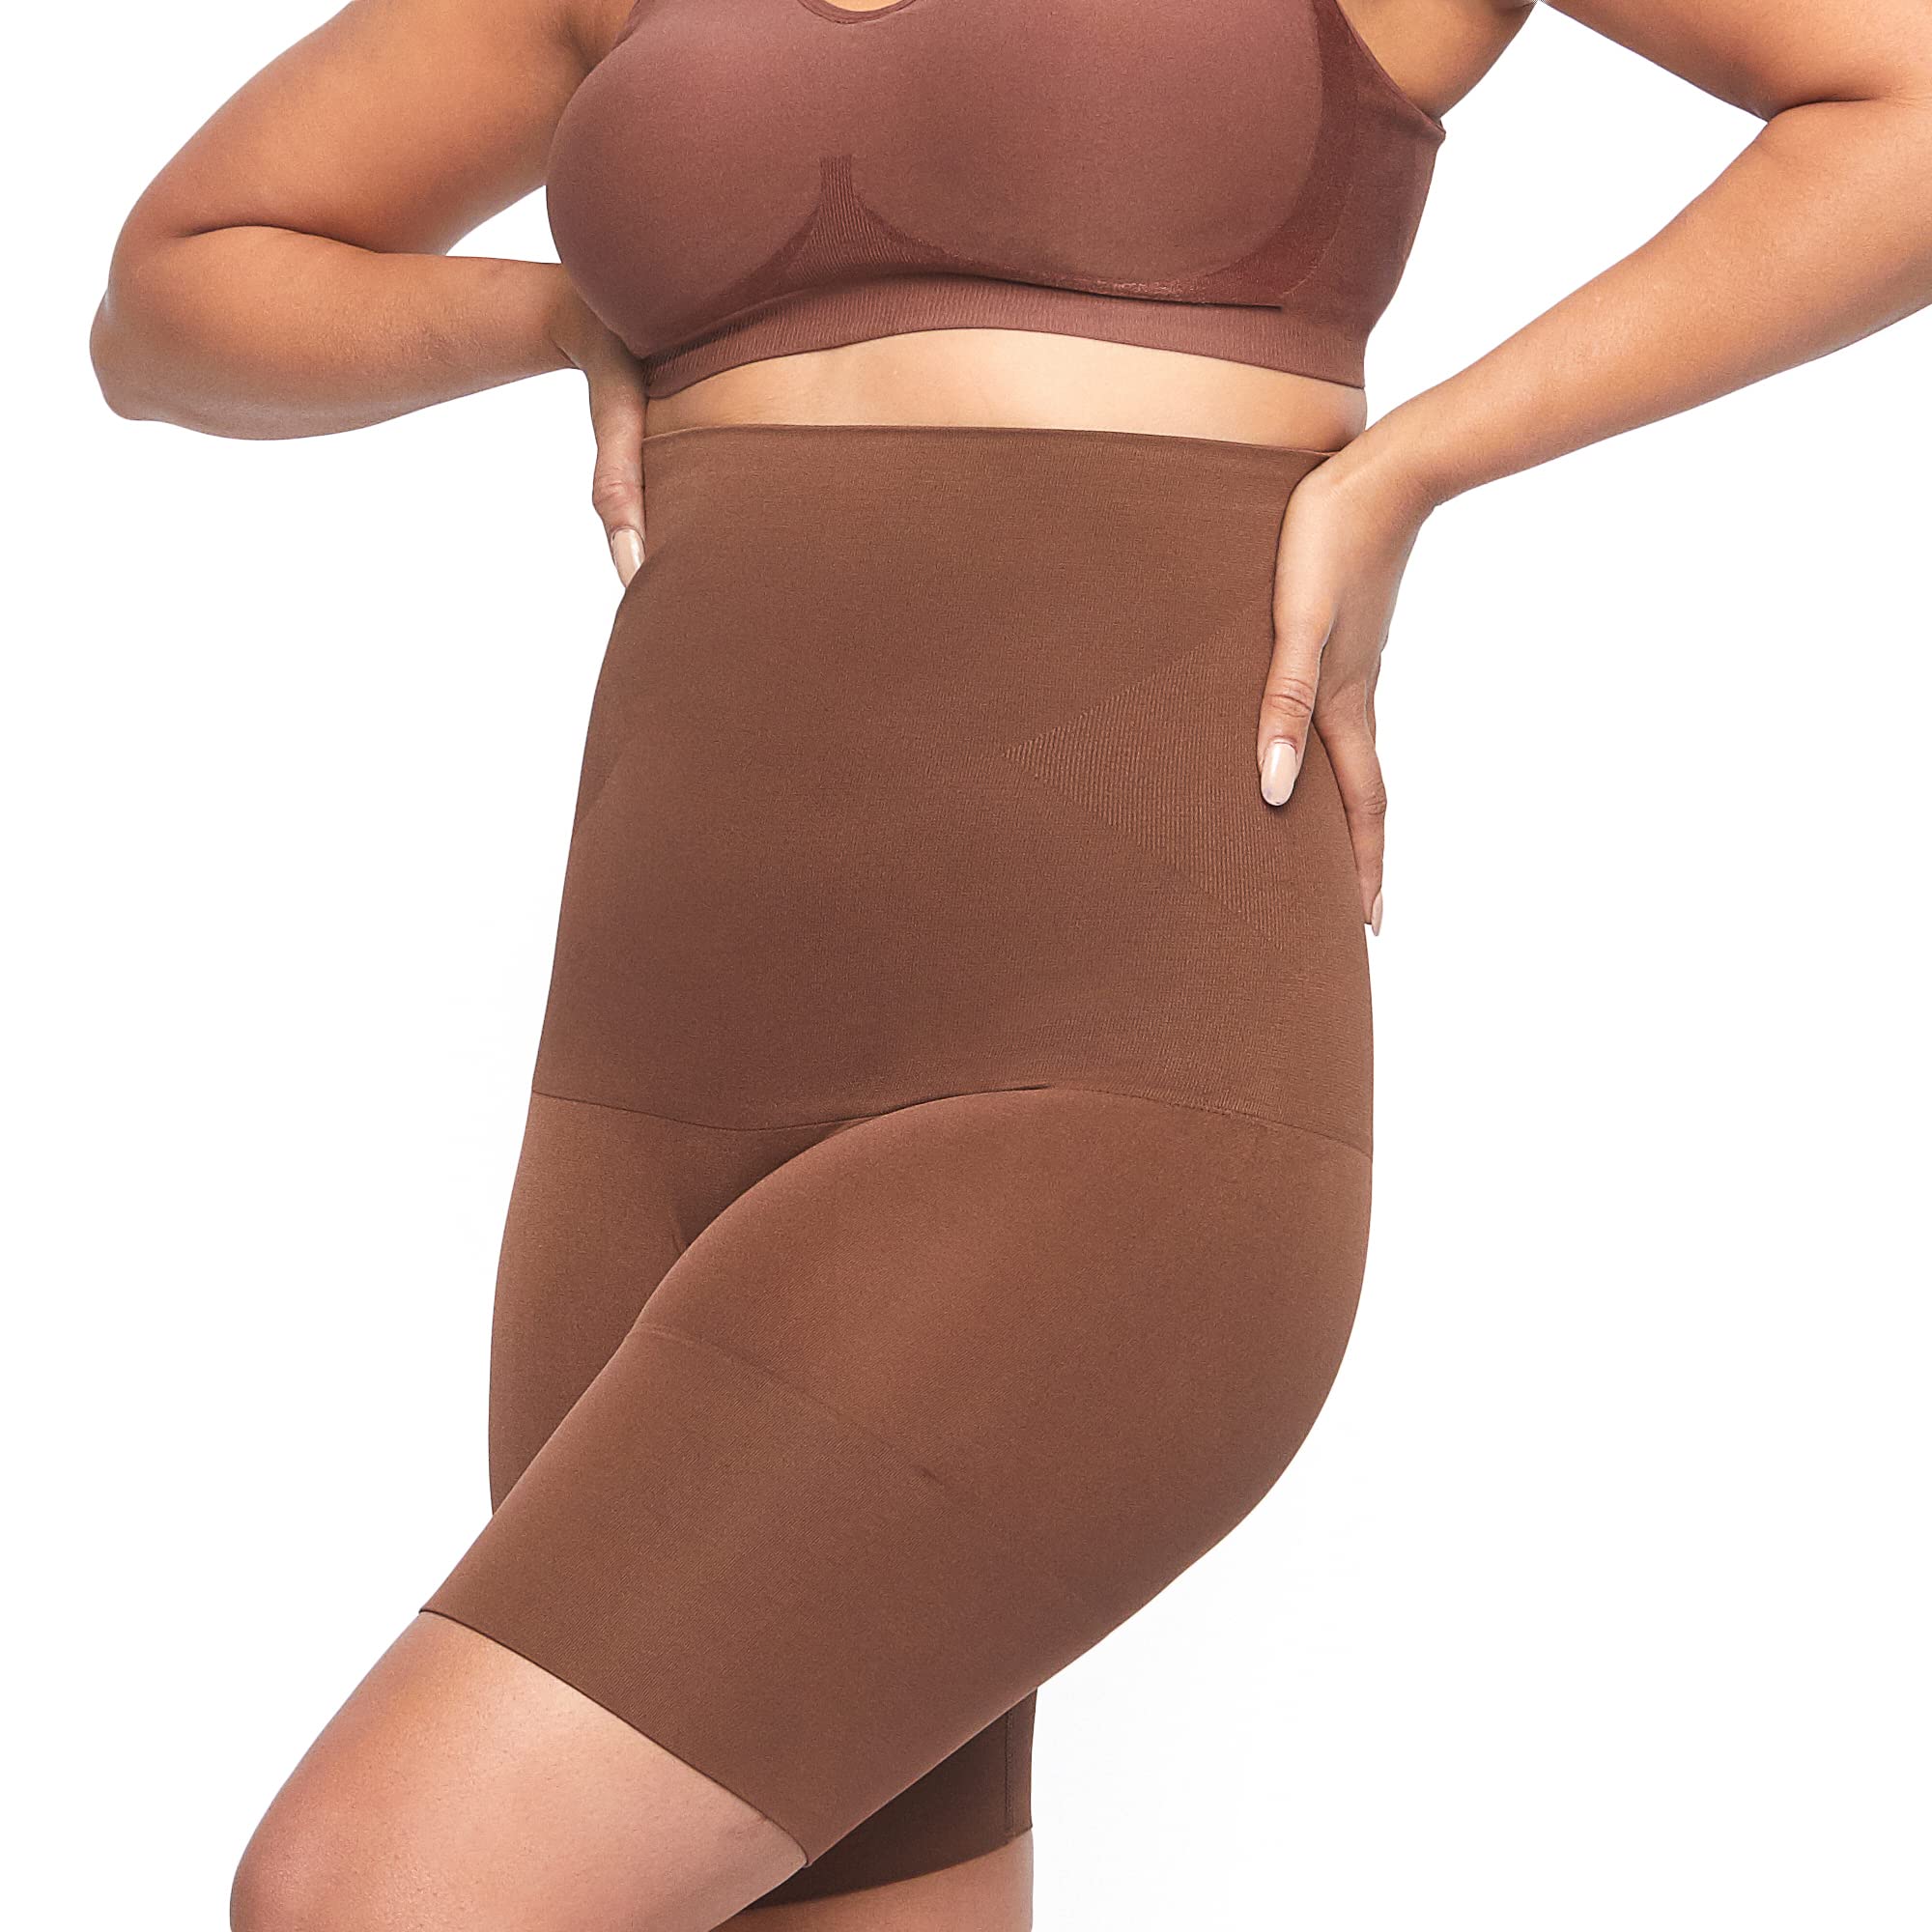 Underoutfit Shapewear for Women Tummy control- High Waisted Shorts- Body  Shaper for Women- Small to Plus Sizes